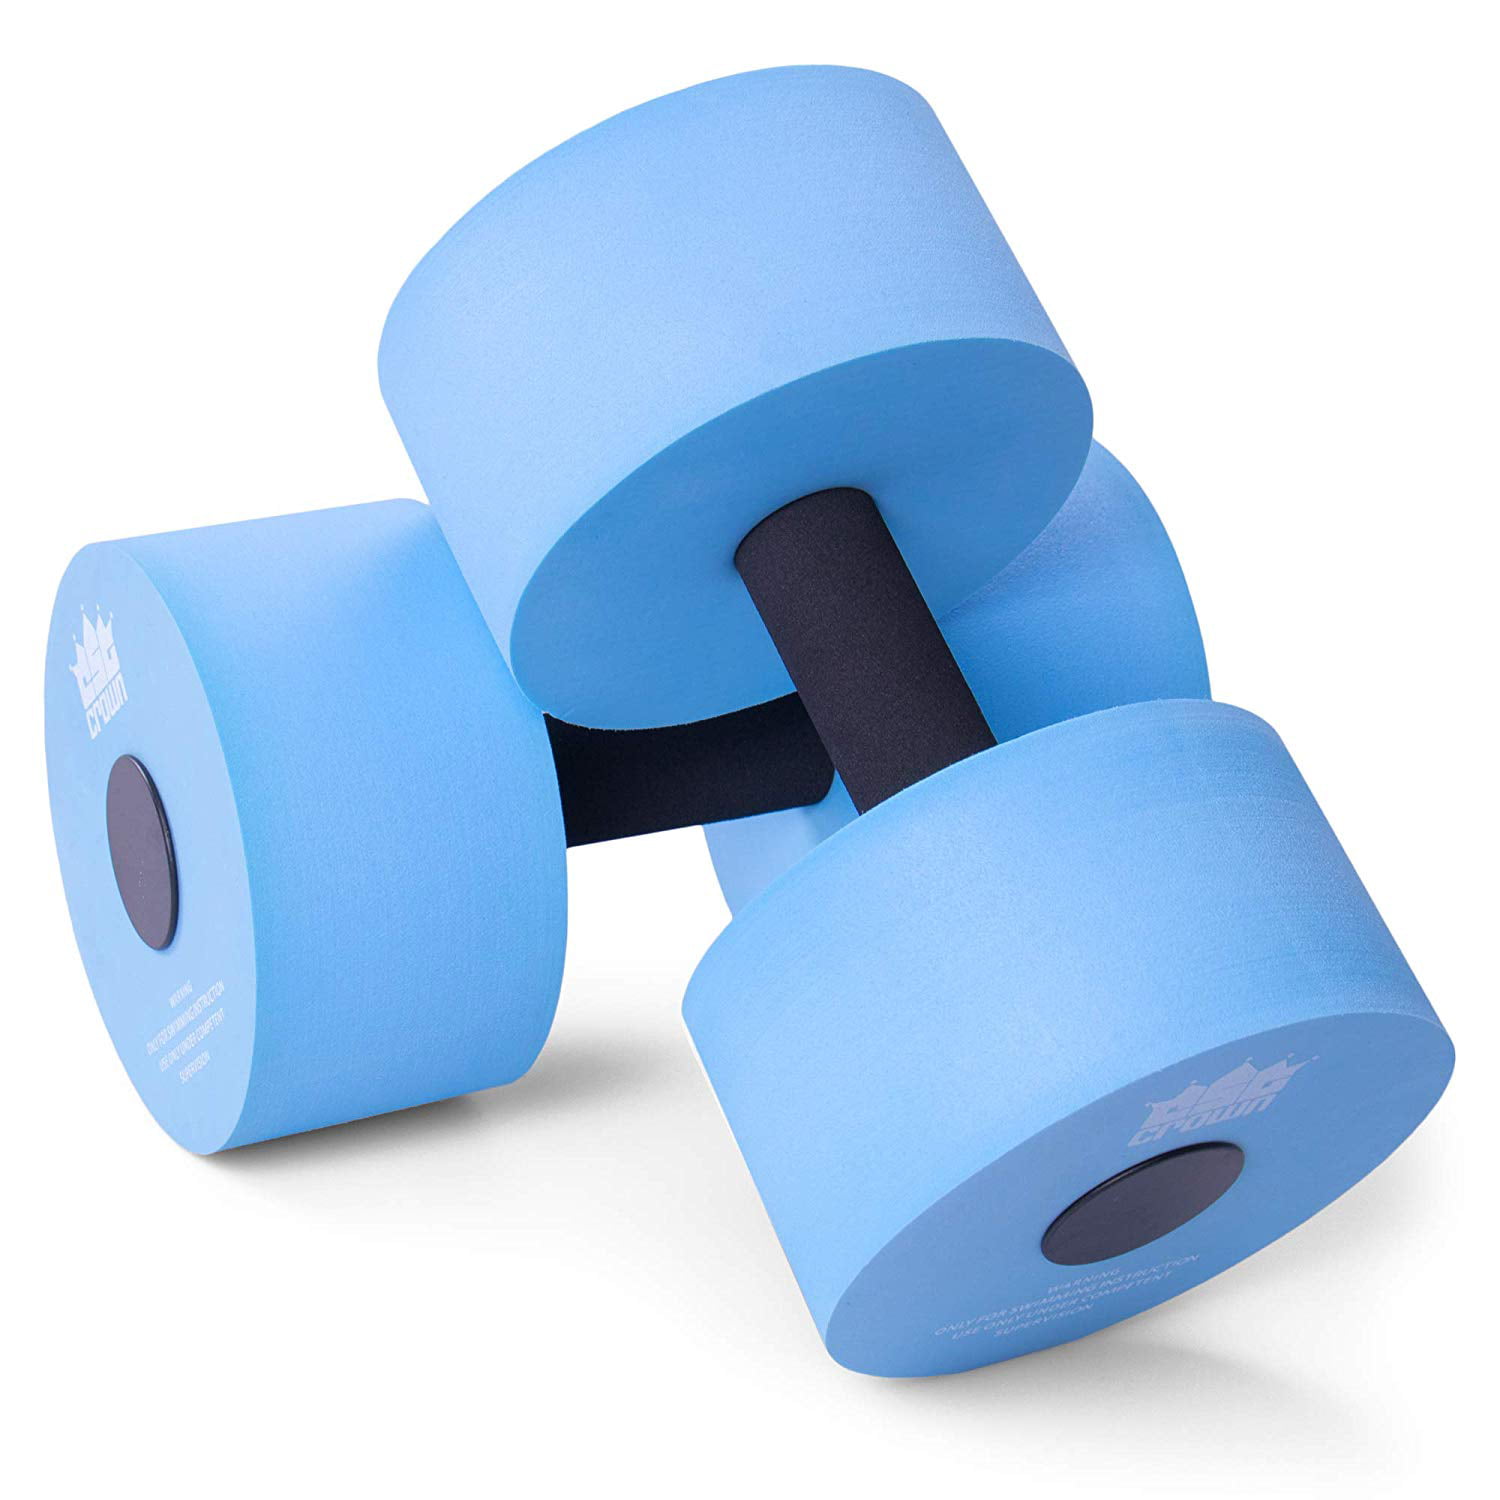 Picture of Brybelly SSWI-309-2 Aqua Dumbbells - Pack of 2